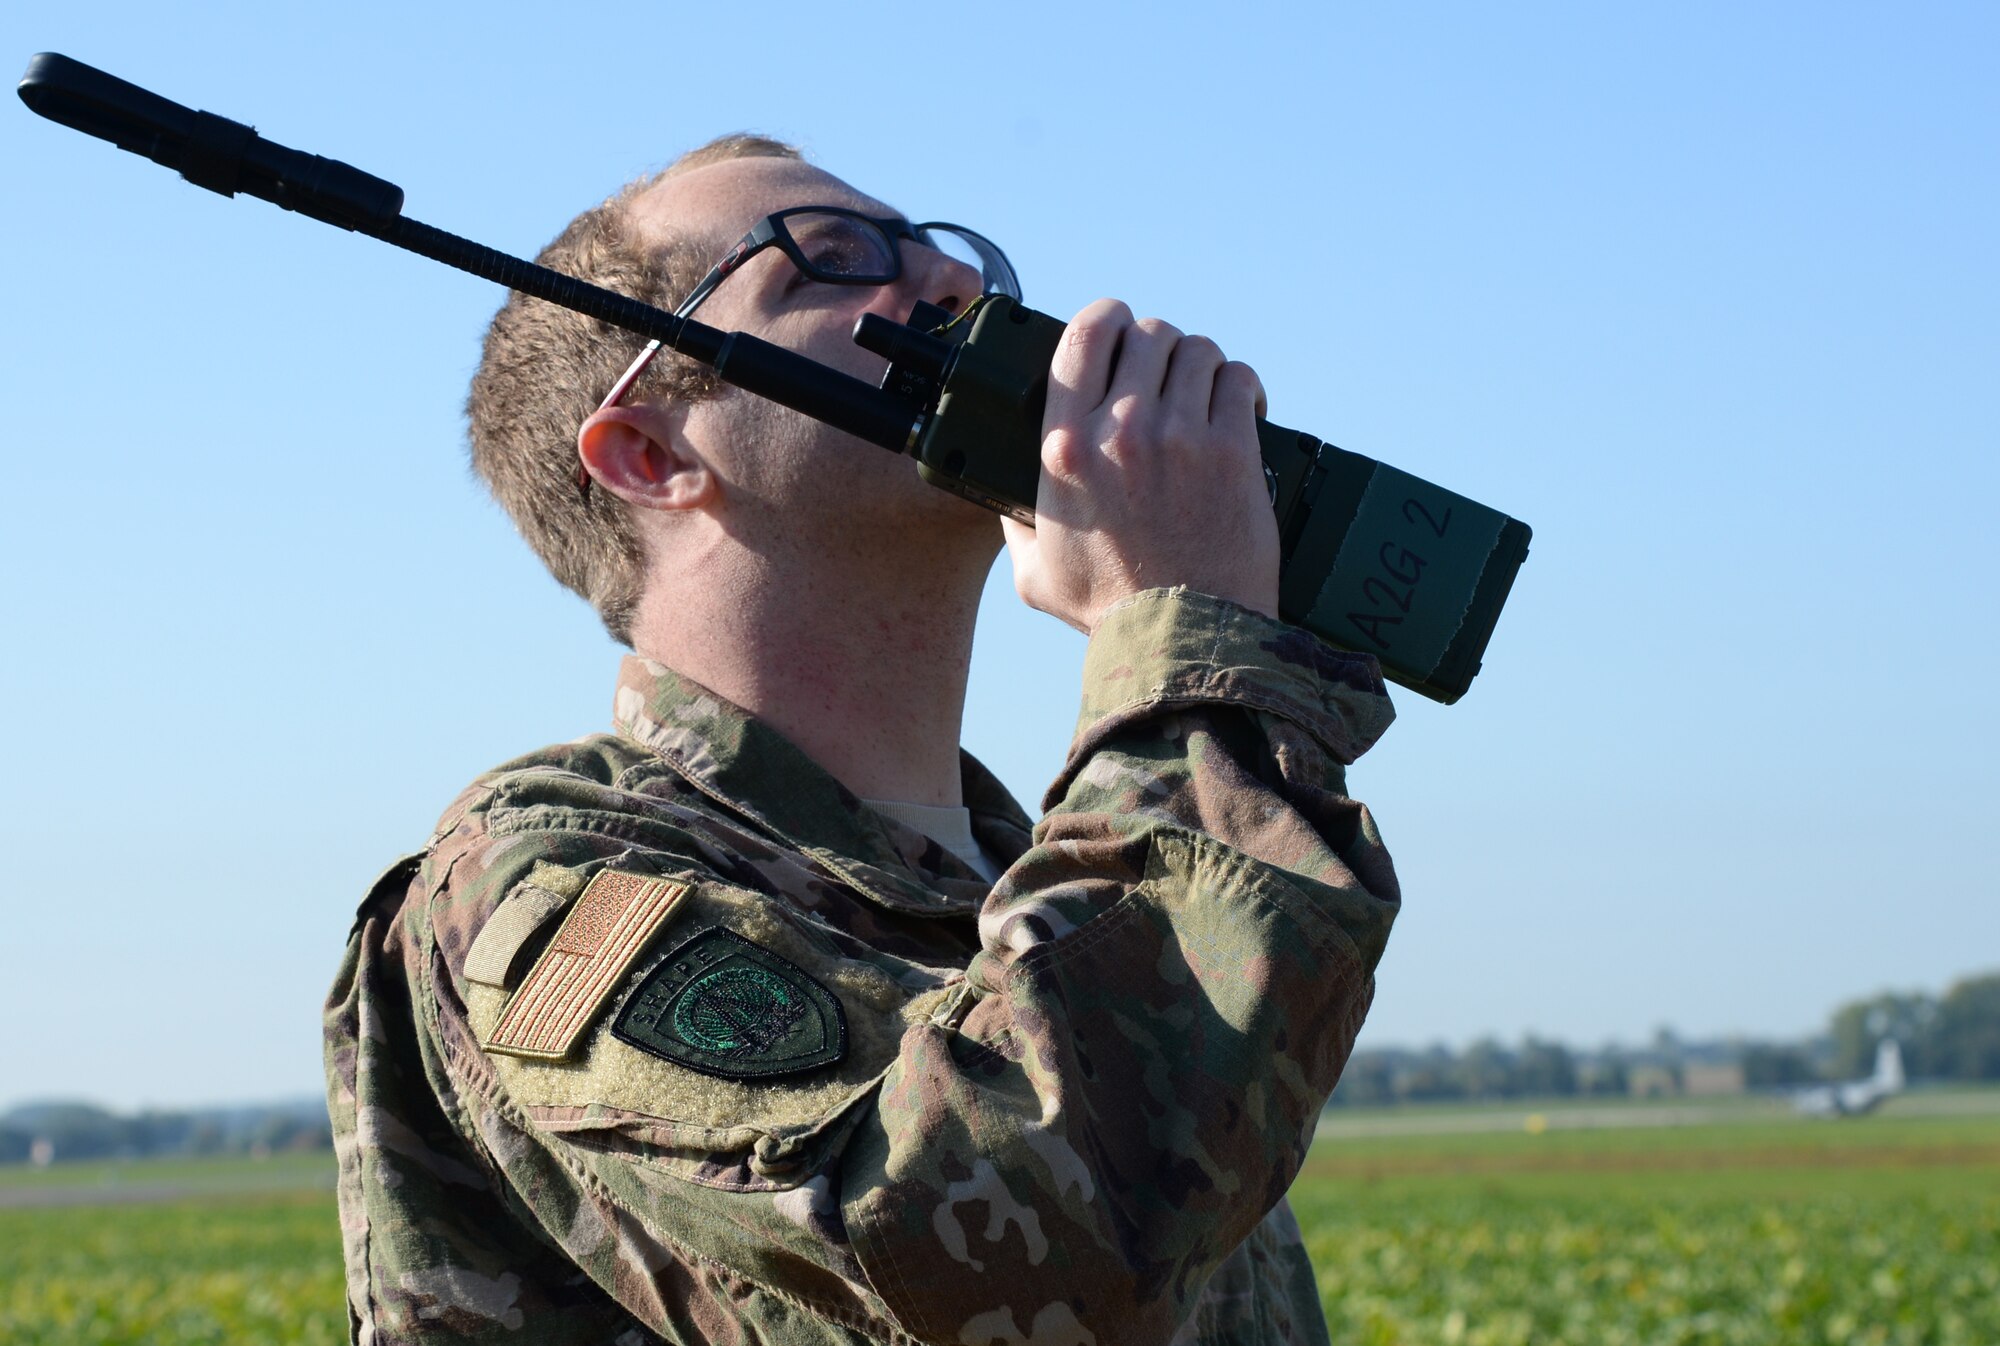 U.S. Air Force Staff Sgt. Dylan Fiveash, 424th Air Base Squadron, non-commisioned officer in charge of Airfield Managment, repsonds to a call on the flightline on Chievres Air Base, Belgium, Oct. 4, 2018. Fiveash acts as a safety observer, ensuring that aircraft are safe to land from the ground. (U.S. Air Force photo by Airmans 1st Class Airlel Leighty)